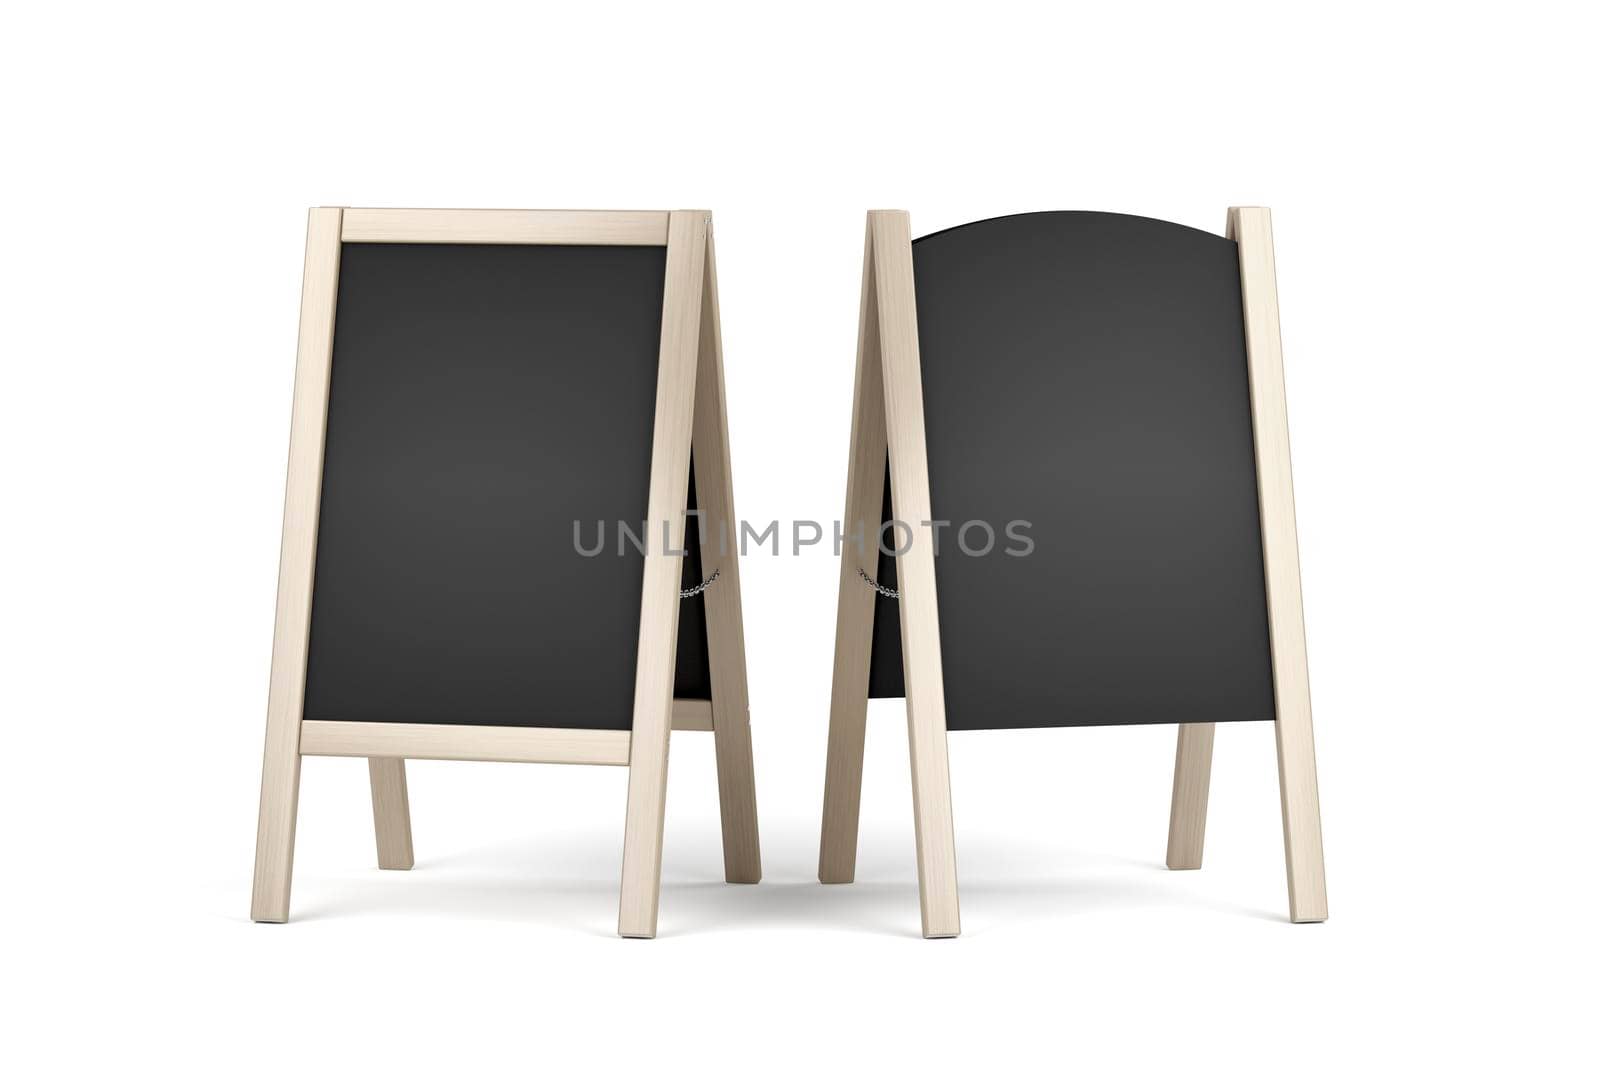 Two wooden menu display boards by magraphics